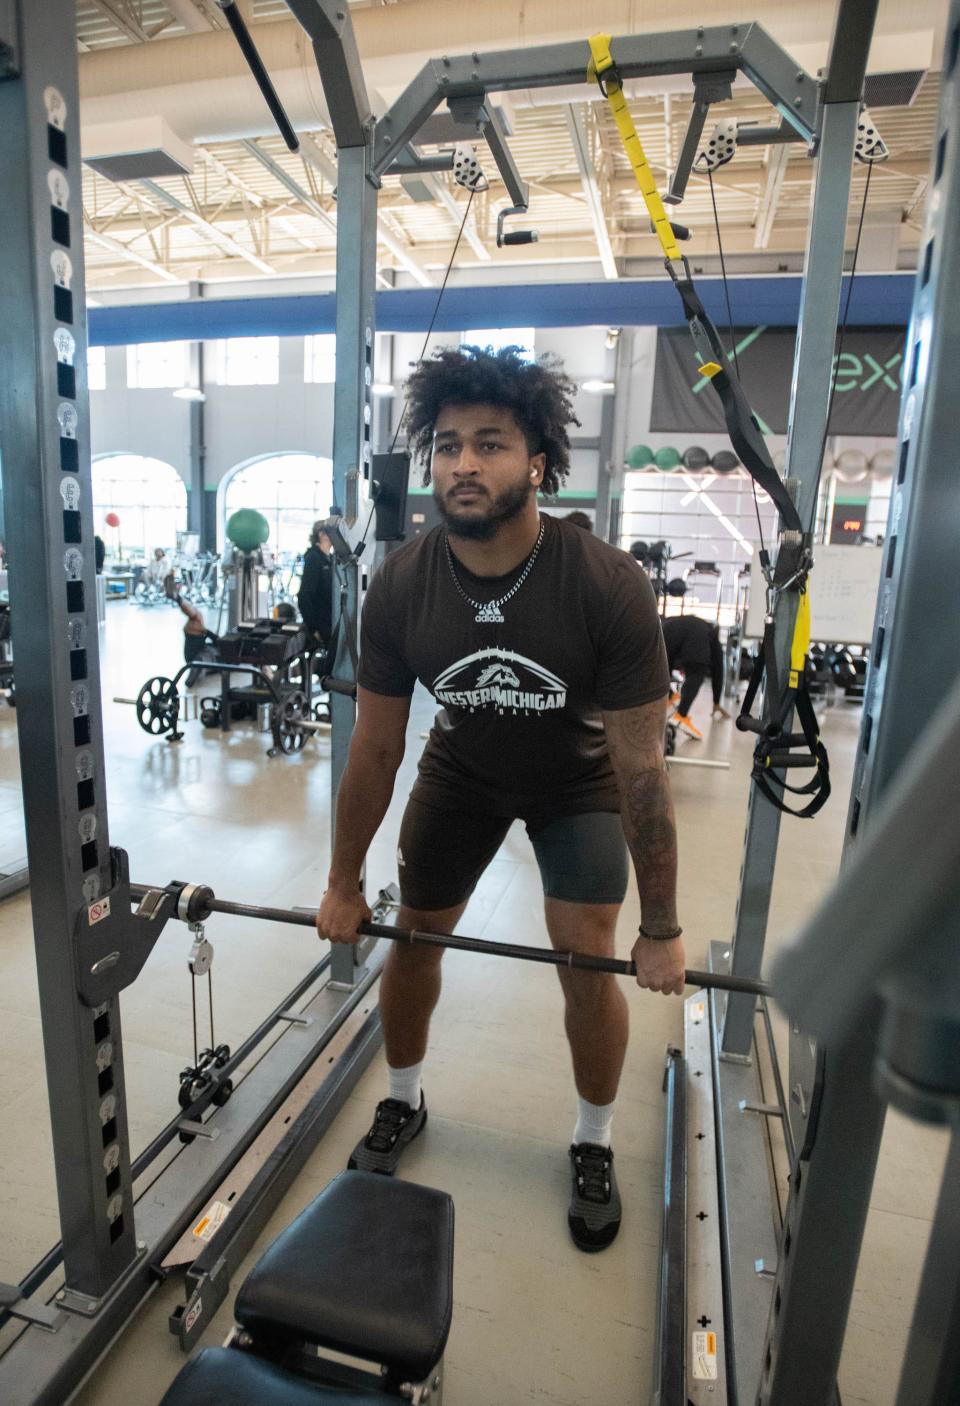 Former Western Michigan University football player Marshawn Kneeland works out at the Exos training facility at the Andrews Institute in Gulf Breeze on Friday, Feb. 17, 2024. Kneeland and other players are preparing for the upcoming NFL Scouting Combine.